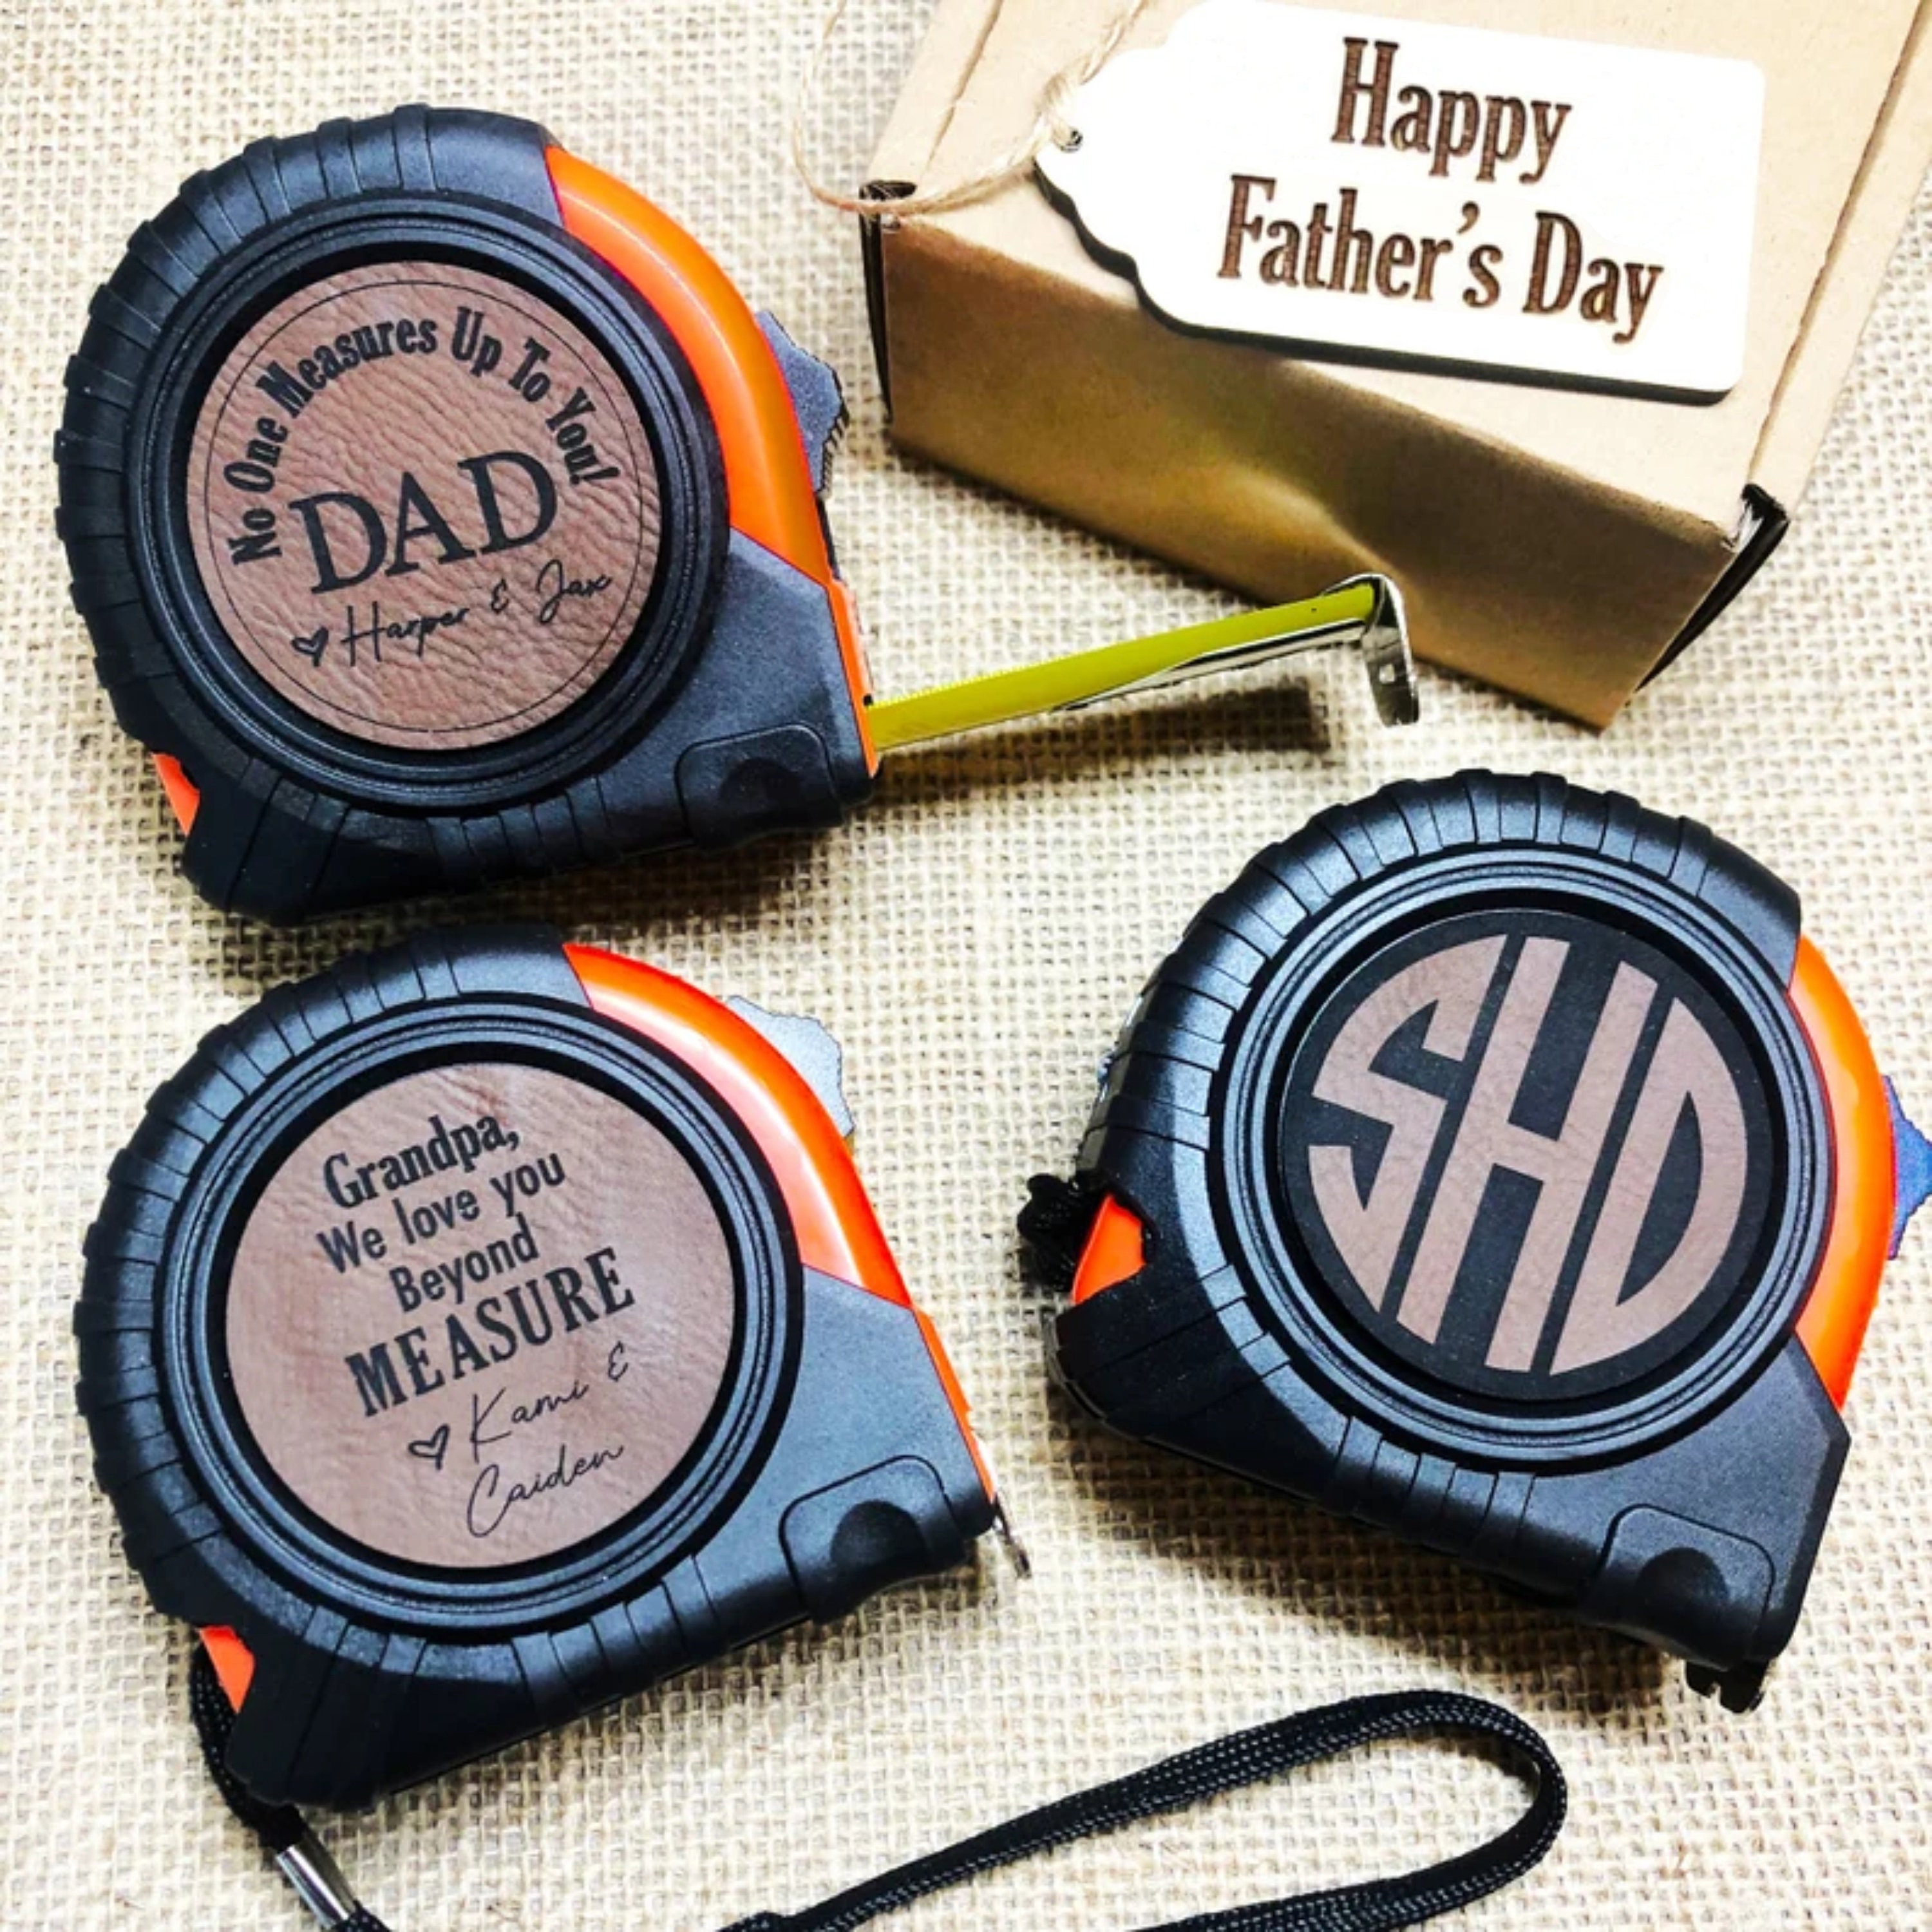 Personalized Tape Measure, Personalized Gift for Father's Day, Father's Day  Gift, Gift for Grandparent, Personalized Tools, Gift From Kids 